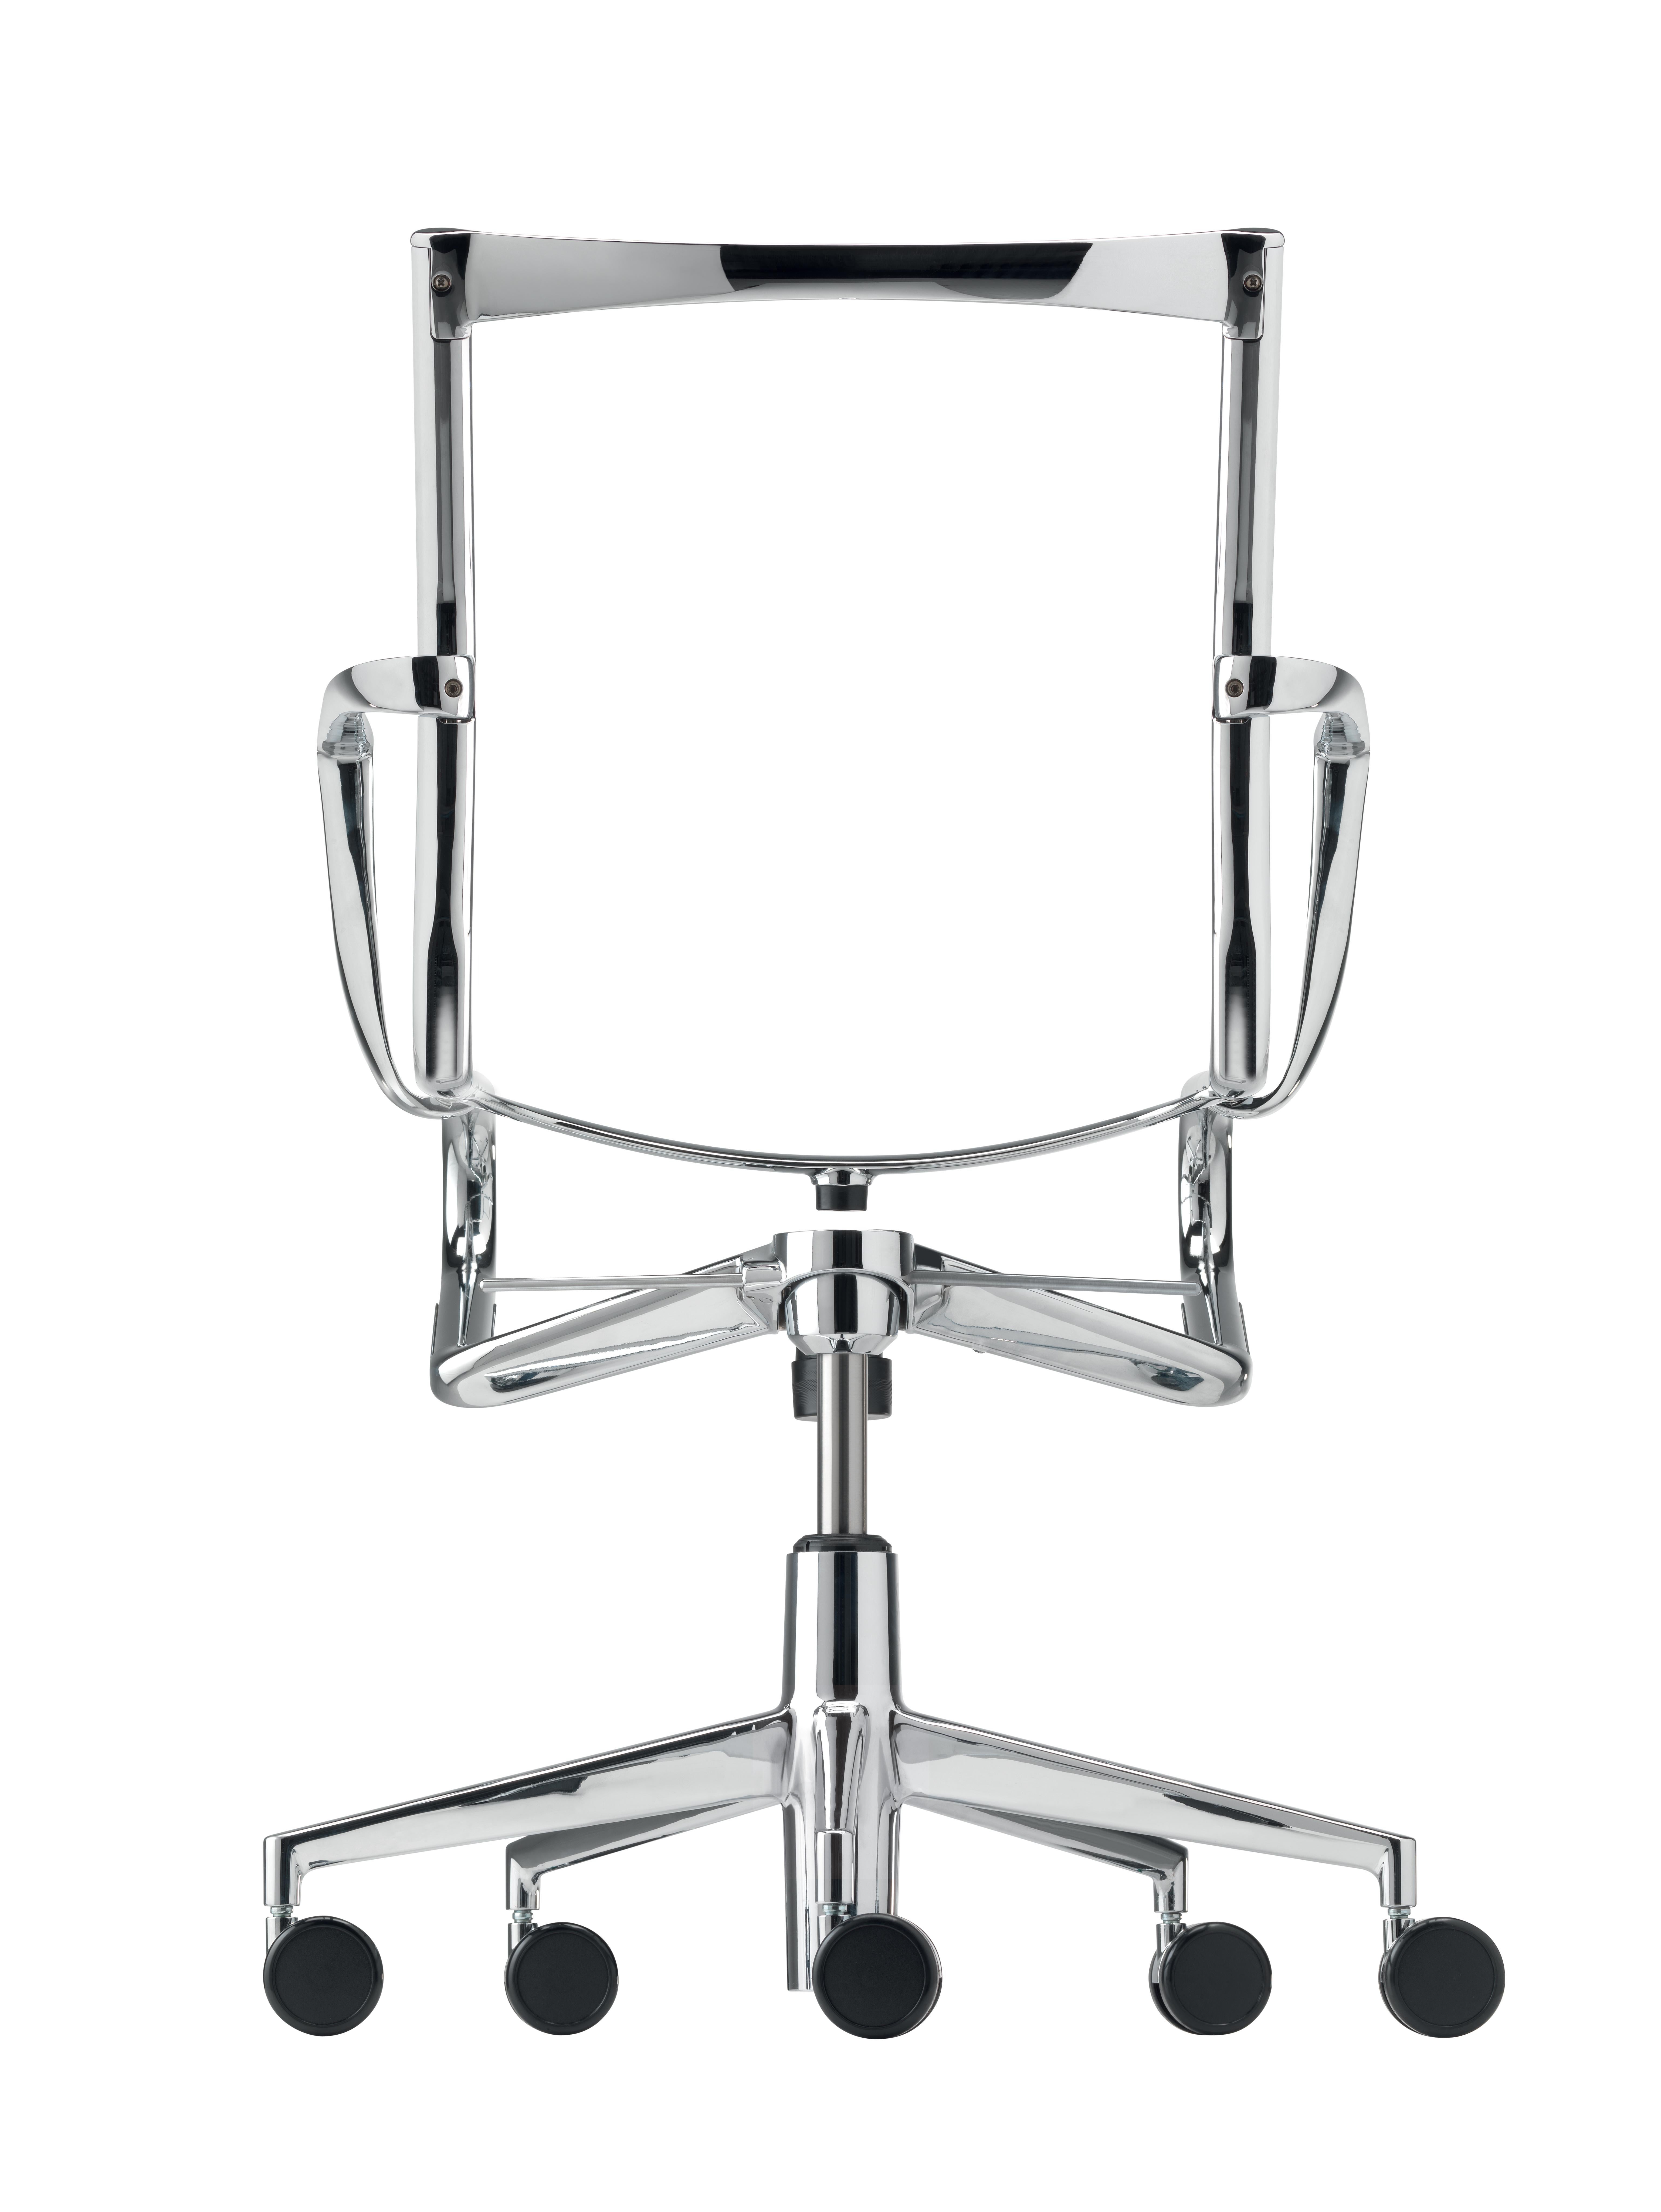 Alias 445 Rollingframe+ Tilt 47 Chair in Black Leather w Chromed Aluminium Frame by Alberto Meda

Height adjustable chair with arms, with soft (or hard or soft breaking ***) castors and 5-star swivel base with tilting mechanism. Structure made of